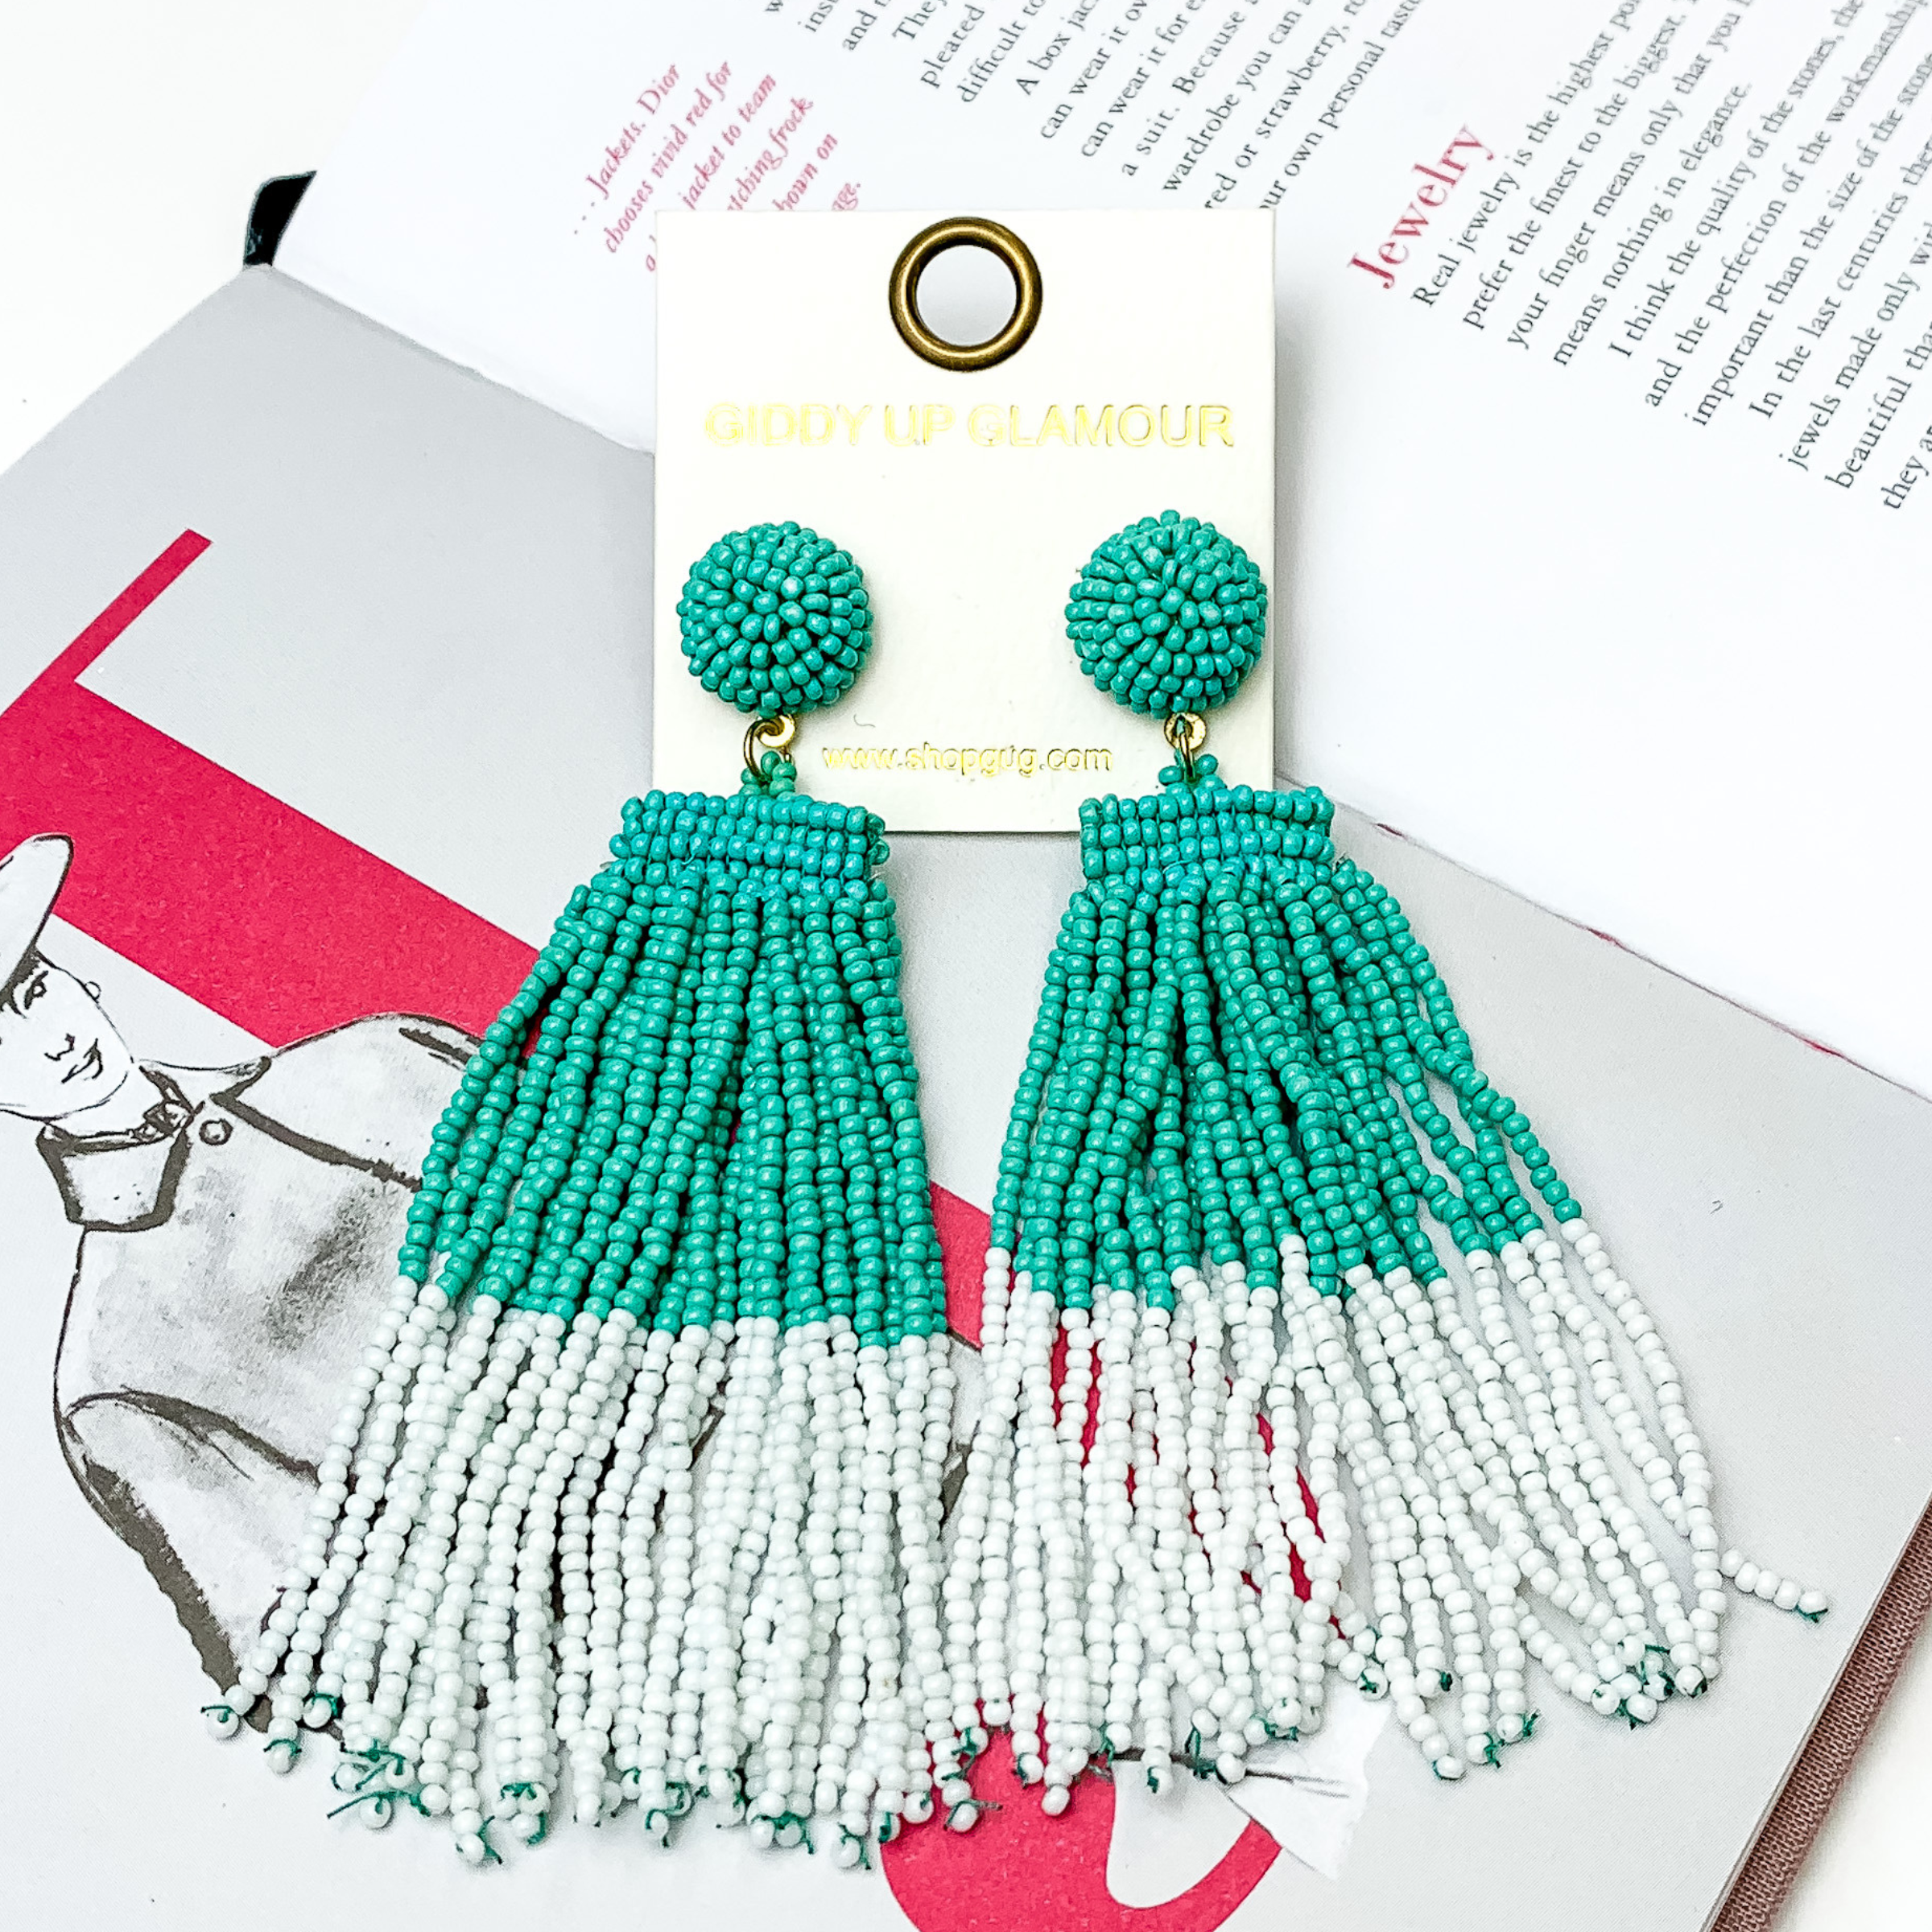 These are circle post back, beaded earrings in turquoise with a hanging beaded tassel. The tassel is half turquoise and half white. These earrings are pictured on top of an open book on a white background. 